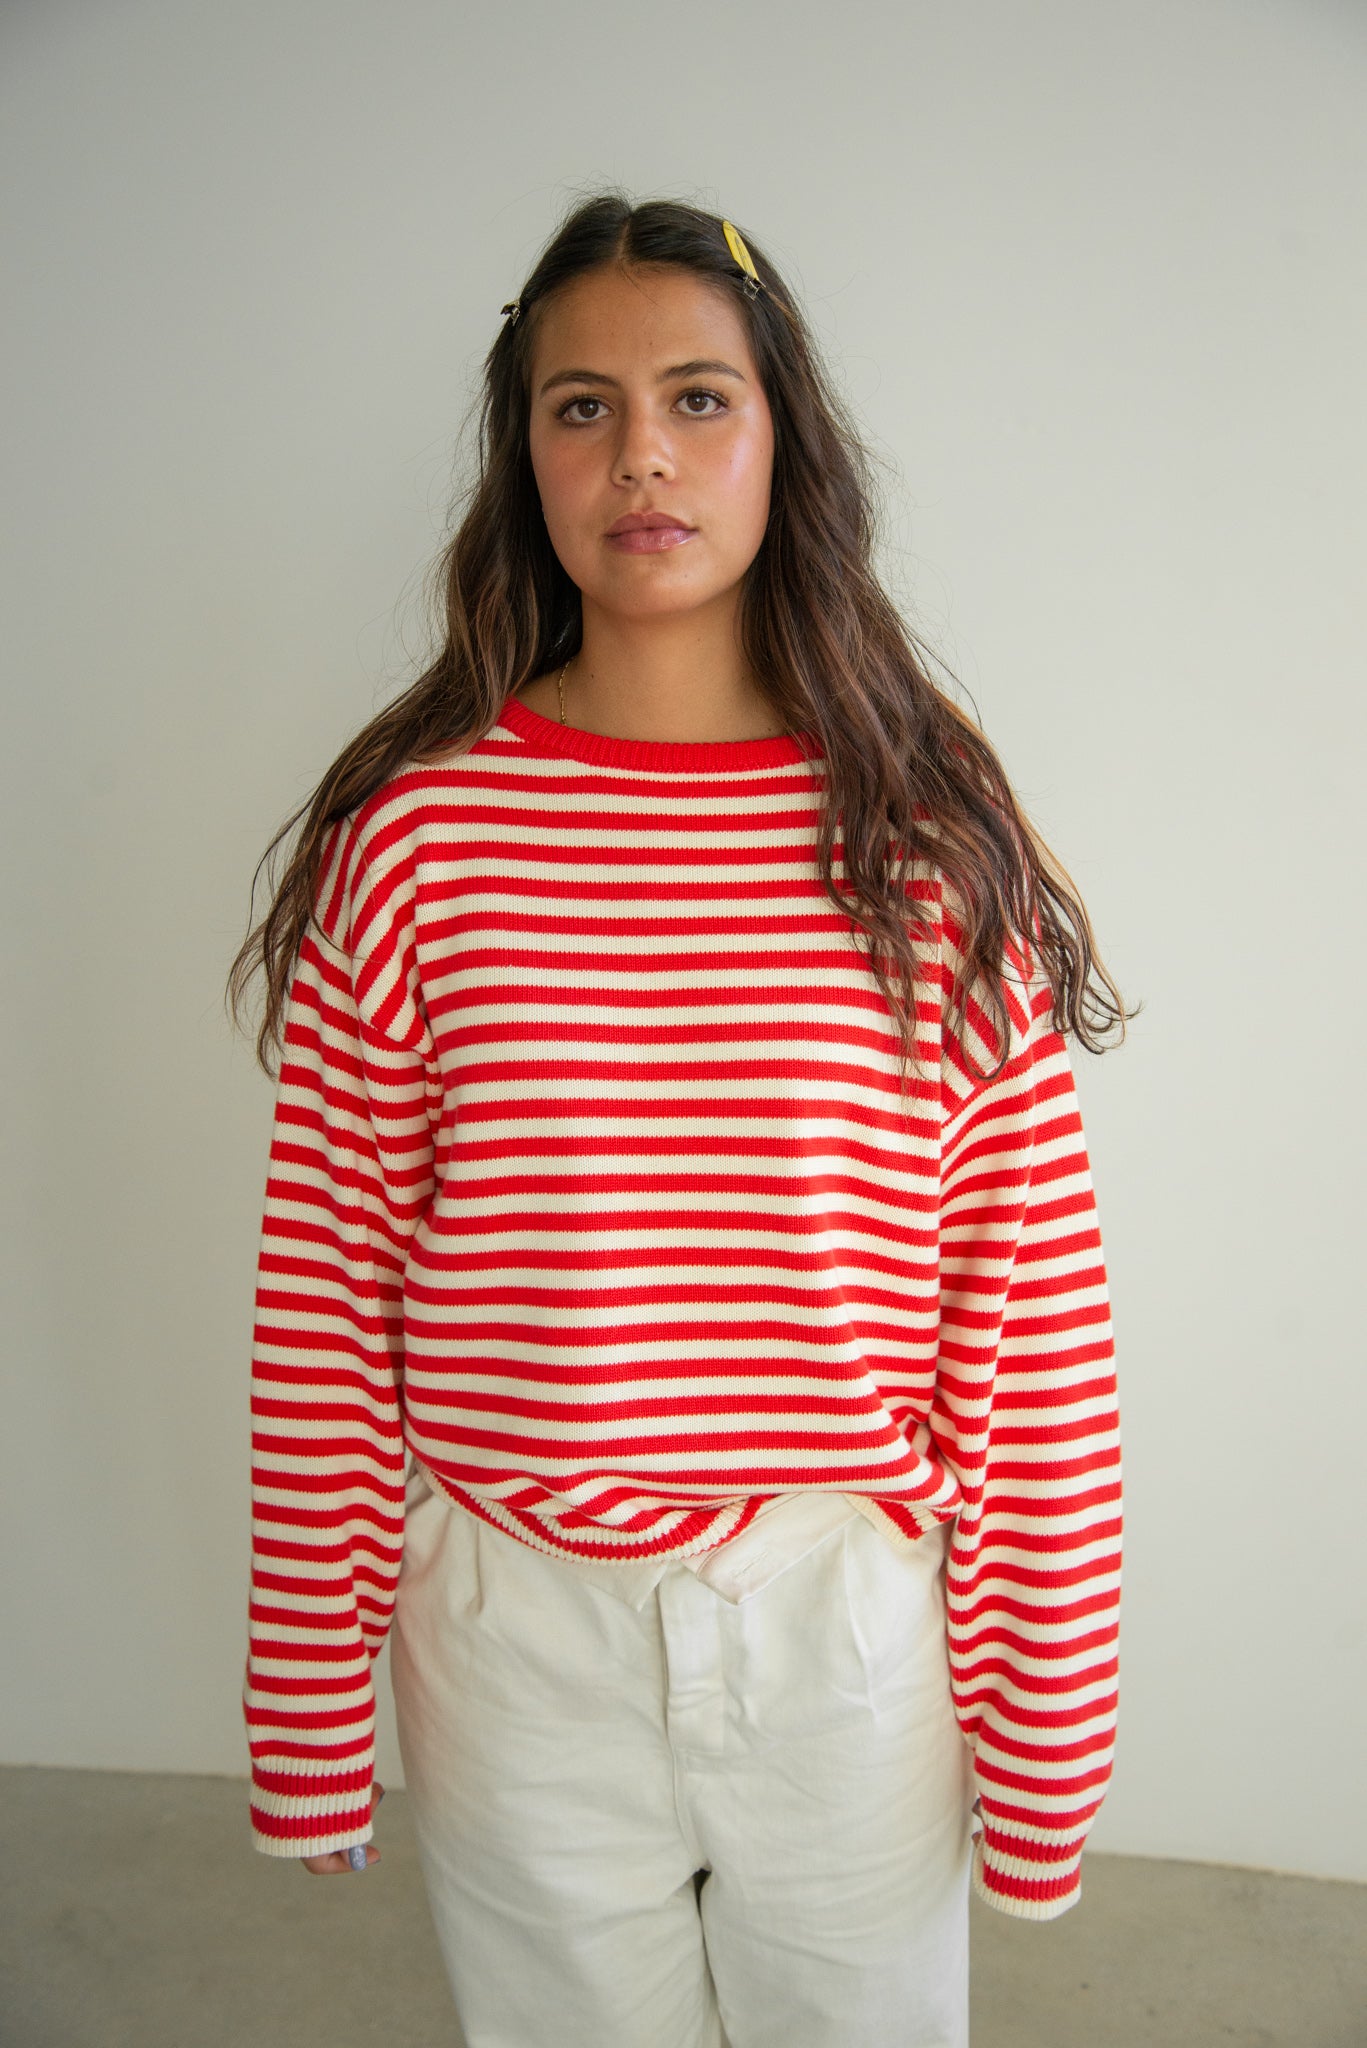 "I Can't Believe it's Not Vintage" Crewneck - Red Stripe